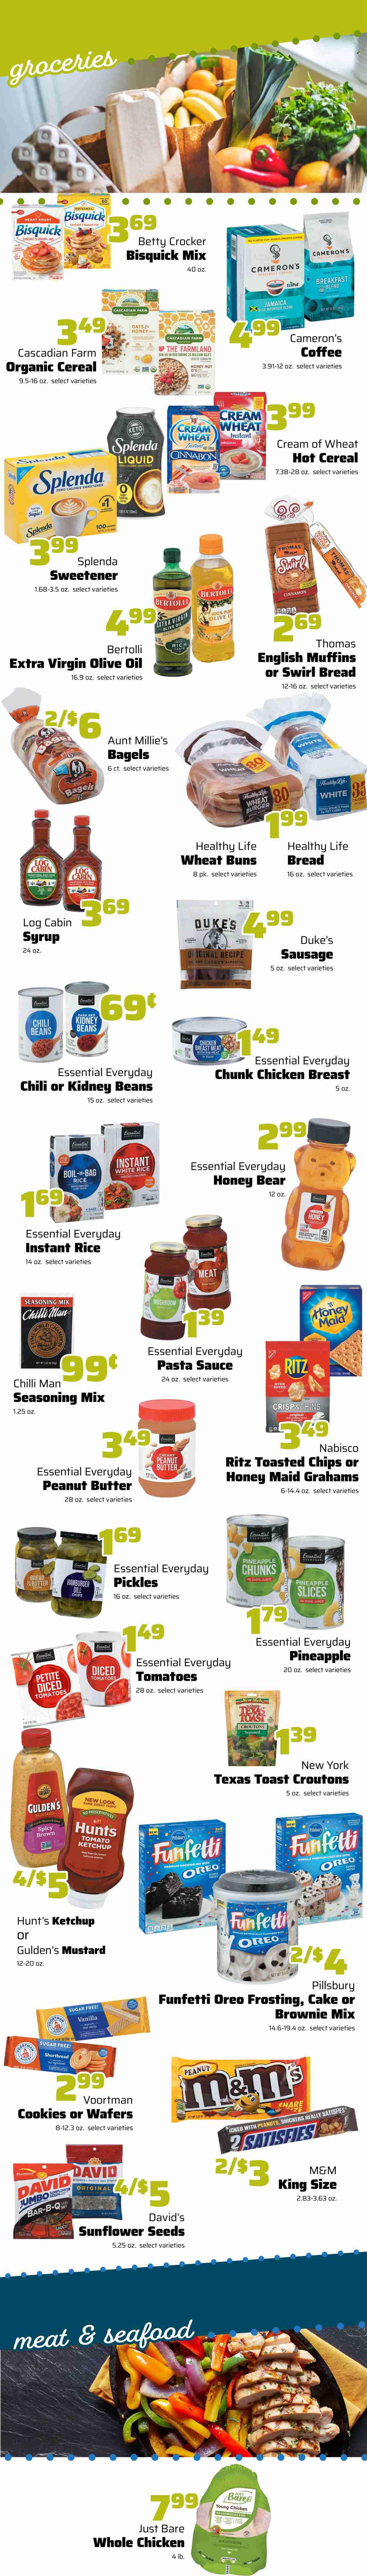 thumbnail - County Market Flyer - 01/12/2022 - 01/18/2022 - Sales products - bagels, english muffins, buns, cupcake, brownie mix, cake mix, corn, pineapple, seafood, pasta sauce, hamburger, pancakes, Pillsbury, Bertolli, sausage, Oreo, cookies, wafers, Snickers, M&M's, chocolate candies, RITZ, chips, Thins, Bisquick, croutons, frosting, brewer, sweetener, kidney beans, pickles, chili beans, cereals, Cream of Wheat, Honey Maid, rice, white rice, long grain rice, dill, spice, cinnamon, mustard, ketchup, extra virgin olive oil, olive oil, oil, corn syrup, peanut butter, syrup, sunflower seeds, juice, coffee, ground coffee, coffee capsules, K-Cups, breakfast blend, whole chicken, chicken breasts. Page 2.